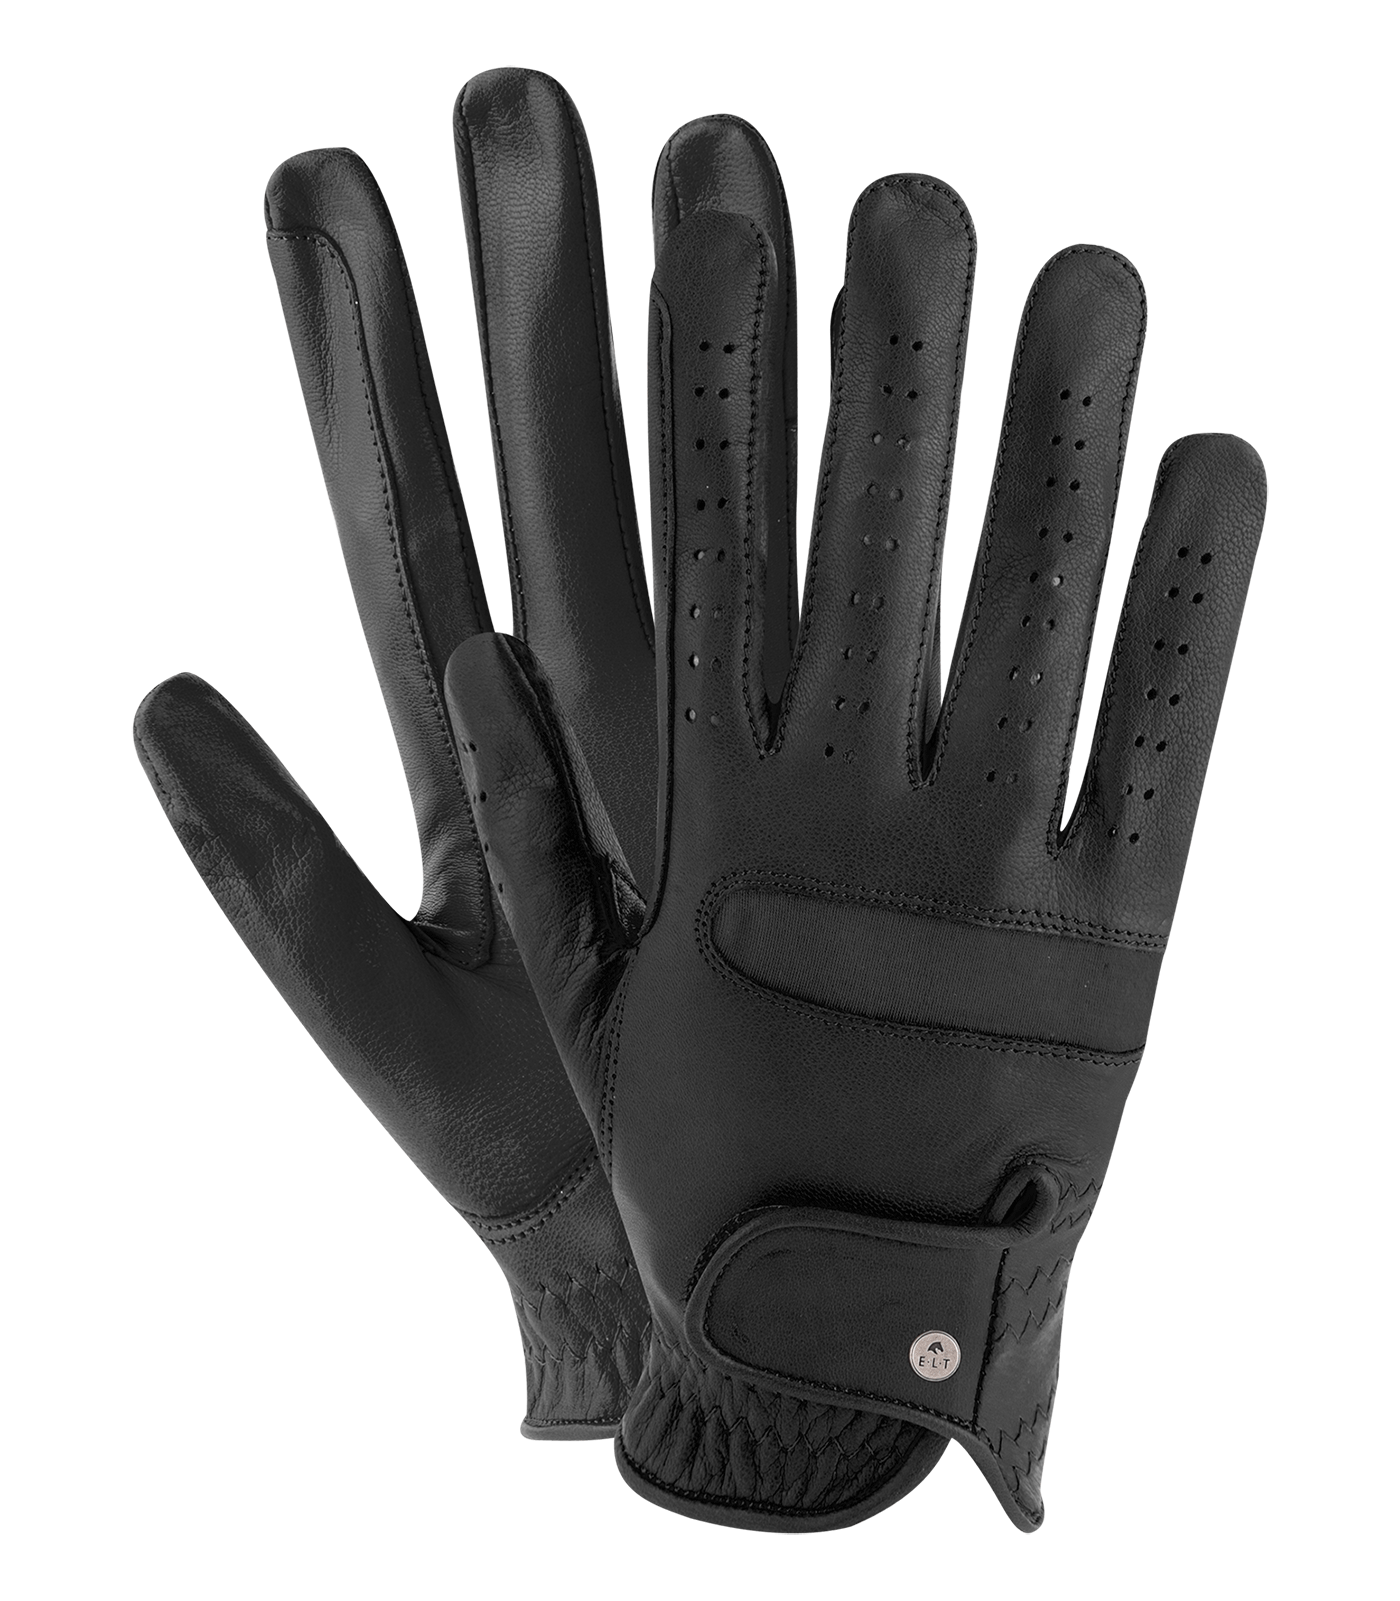 Deluxe Riding Gloves black